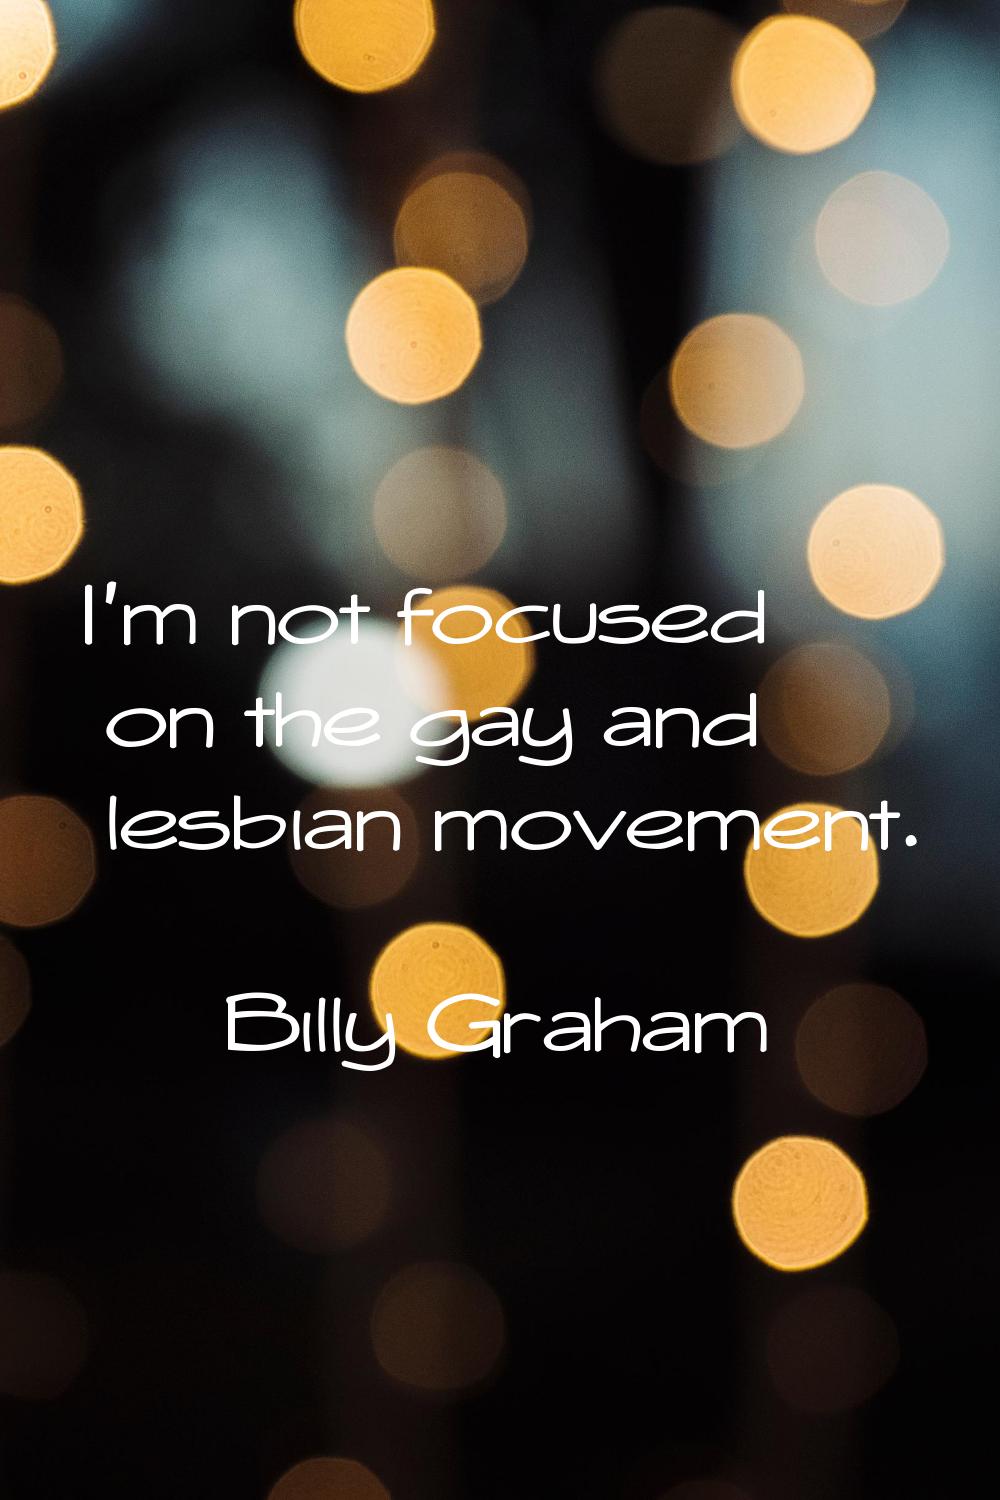 I'm not focused on the gay and lesbian movement.